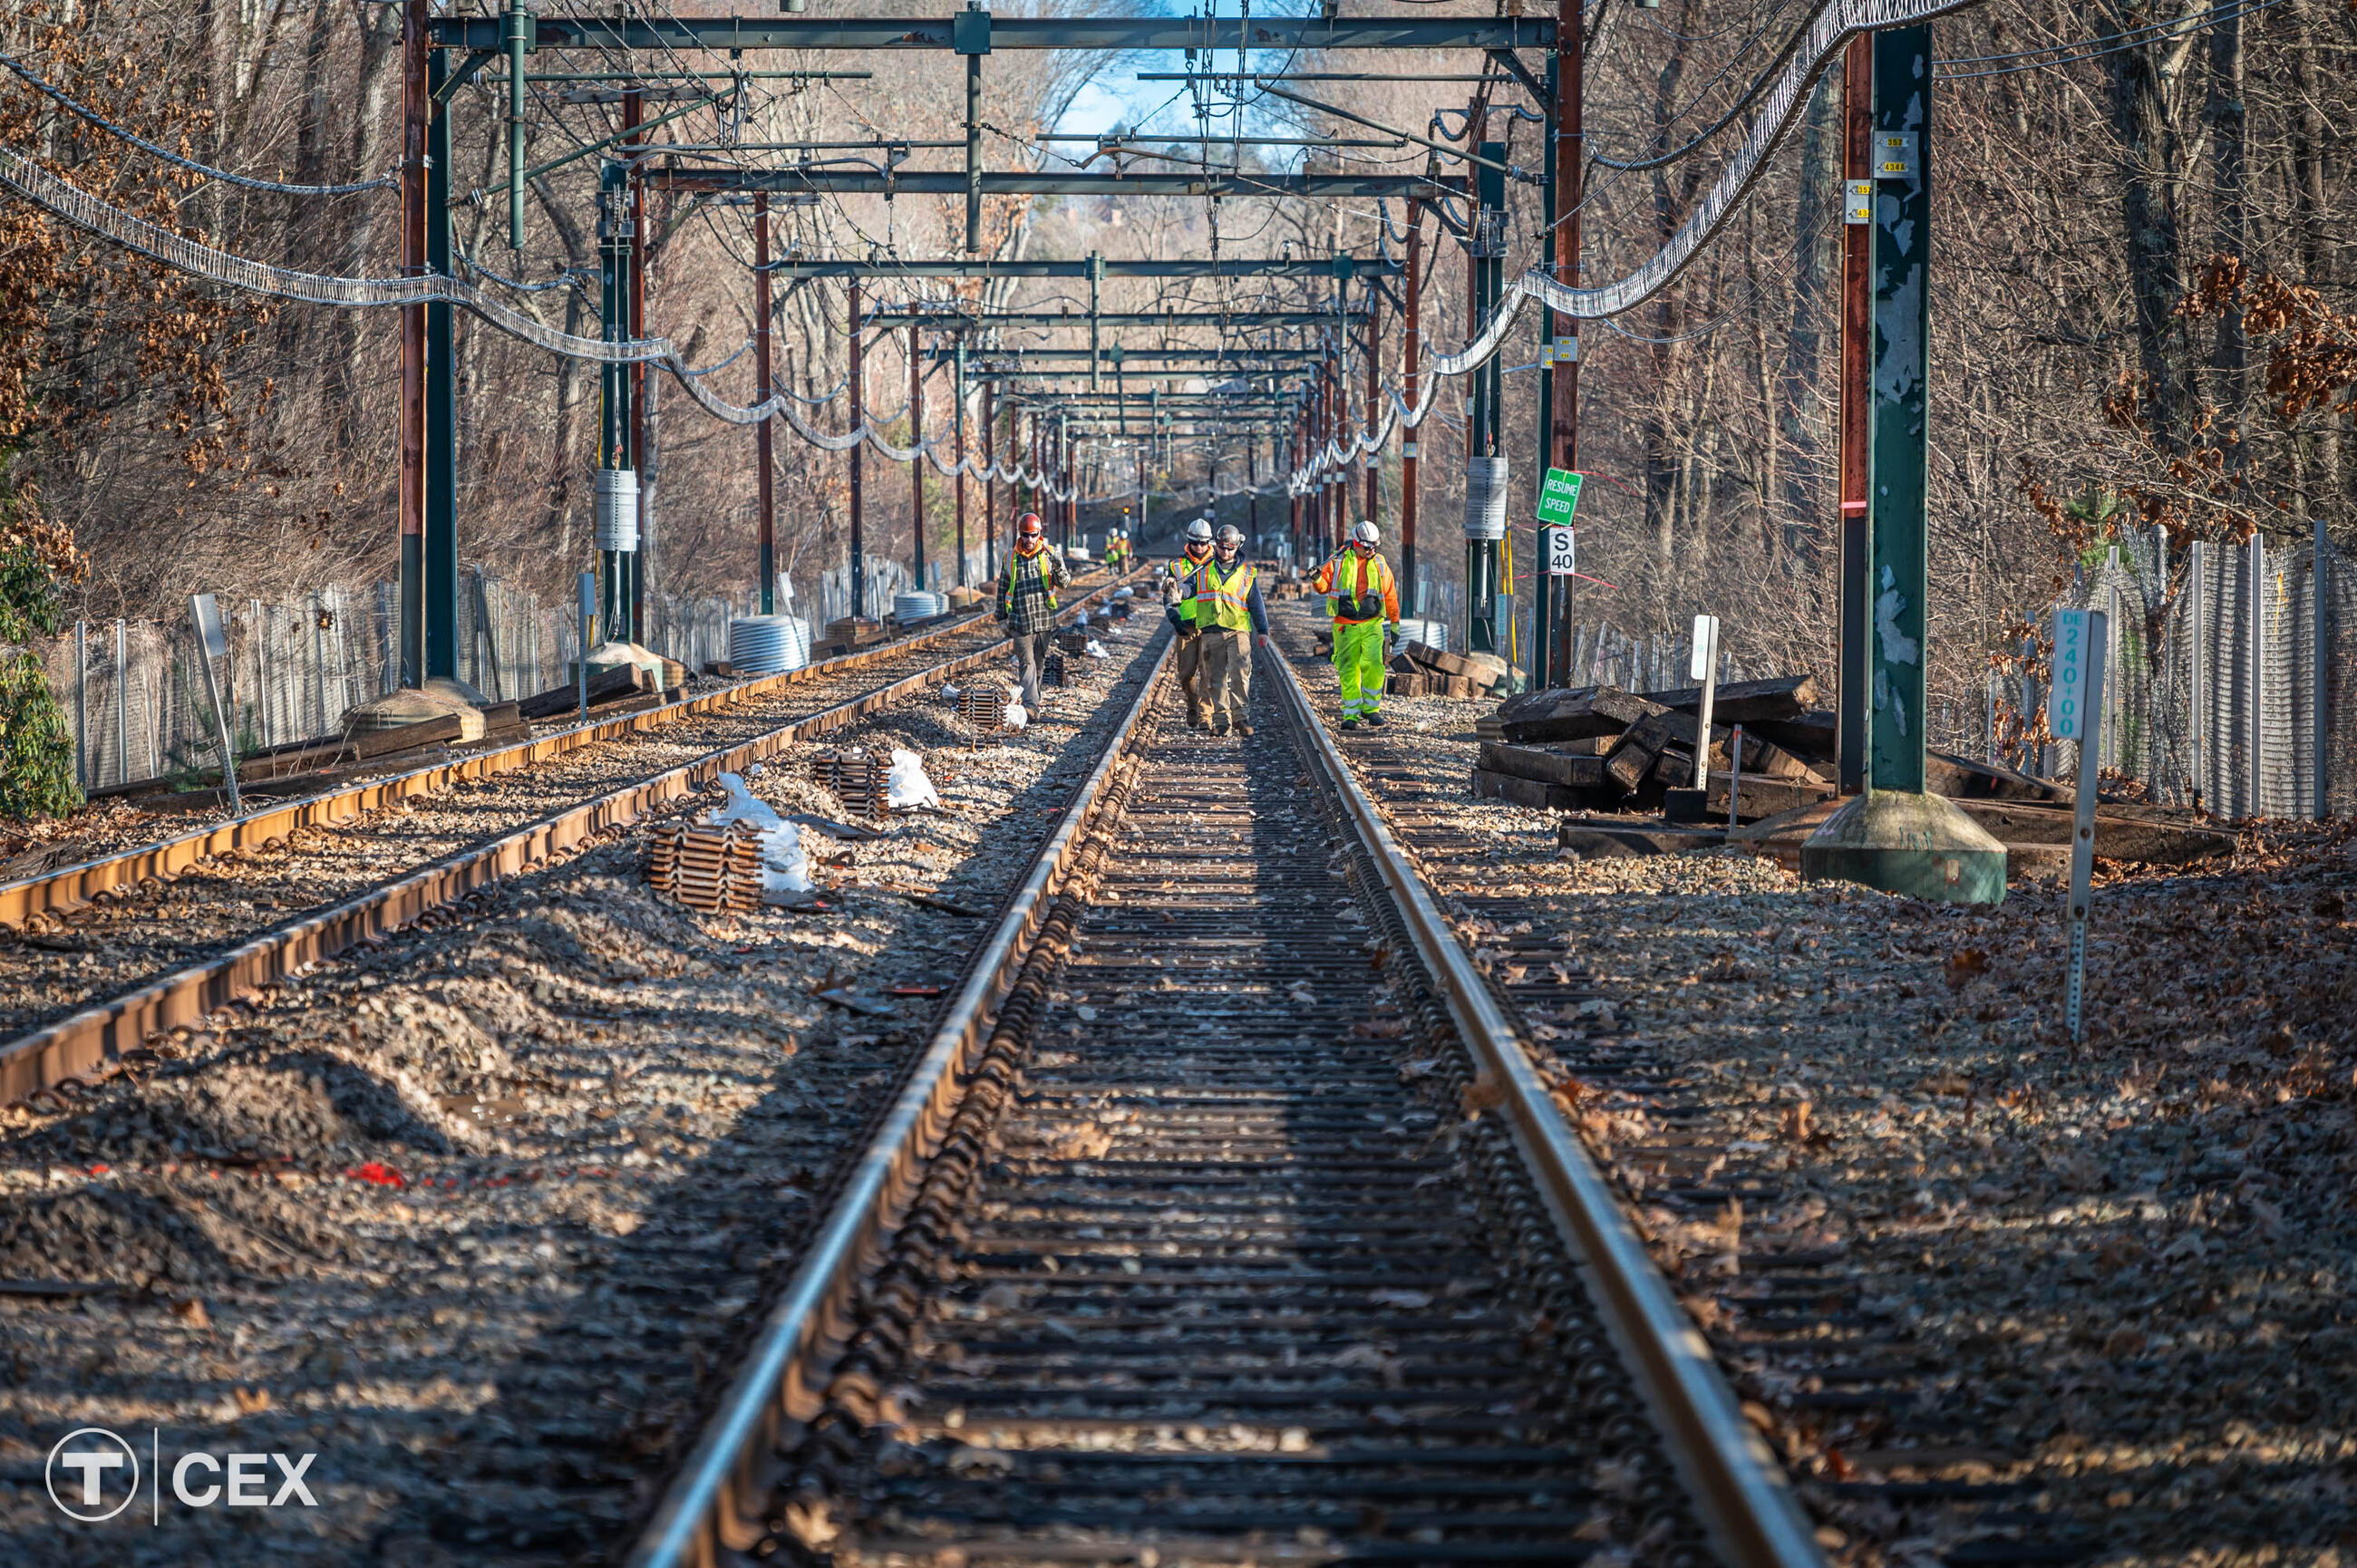 Crews performed track work on the Green Line D branch